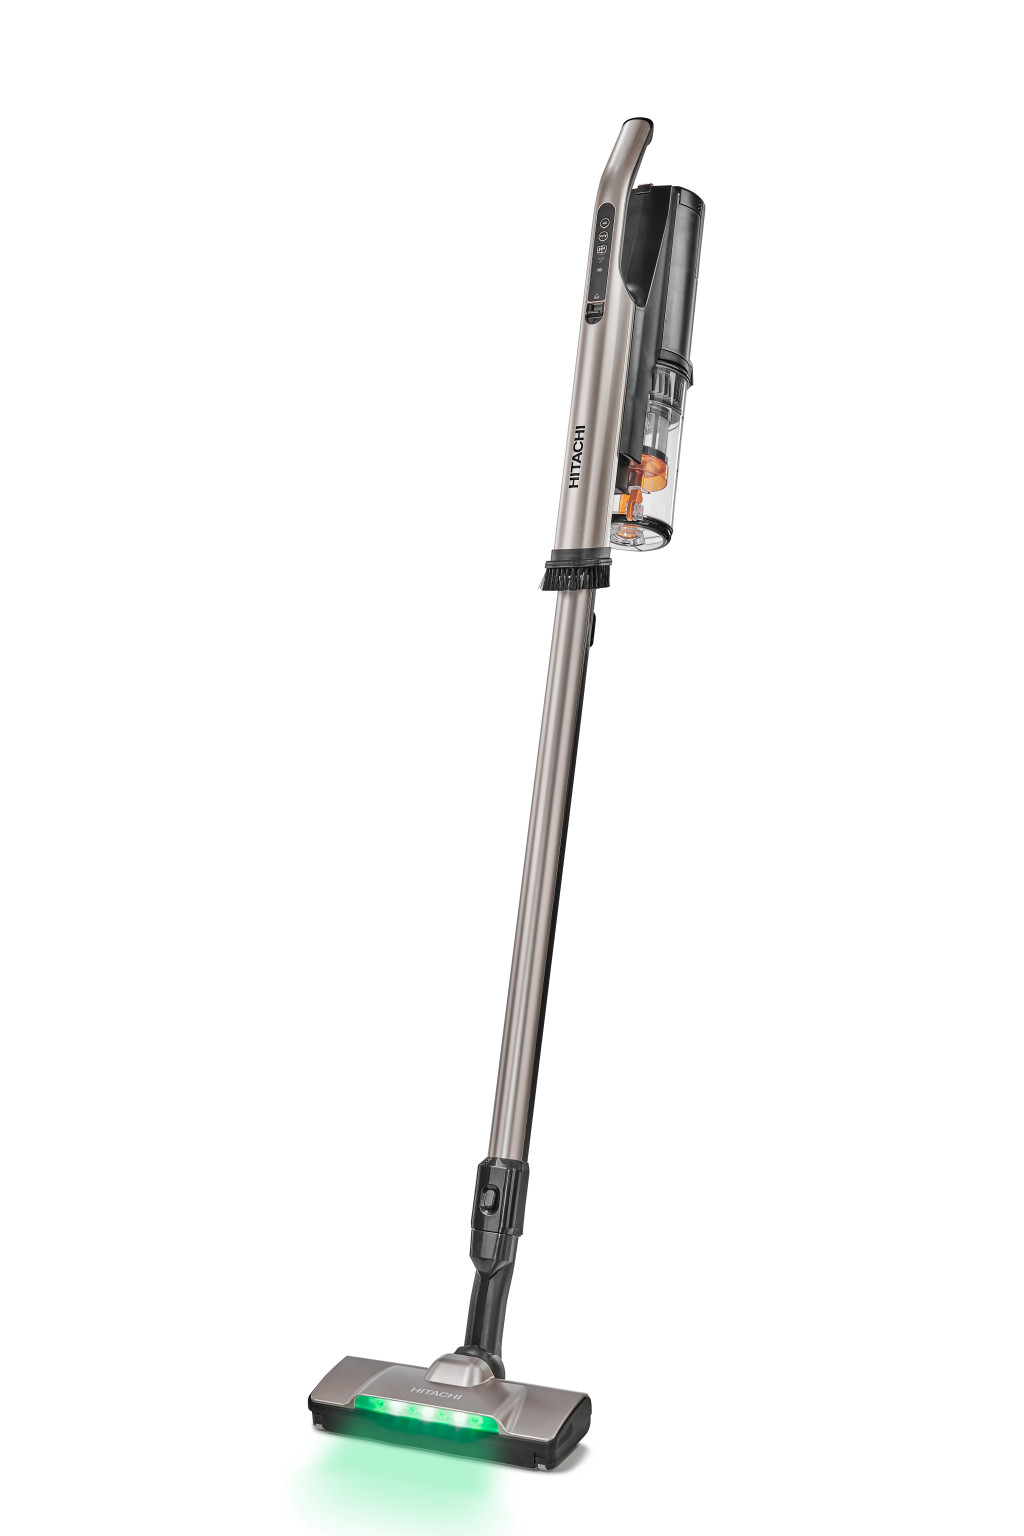 Hitachi | Vacuum Cleaner | PV-XH2M | Cordless operating | Handstick | 25.2 V | Operating time (max) 60 min | Champagne Gold | Warranty 24 month(s) | Battery warranty 24 month(s)